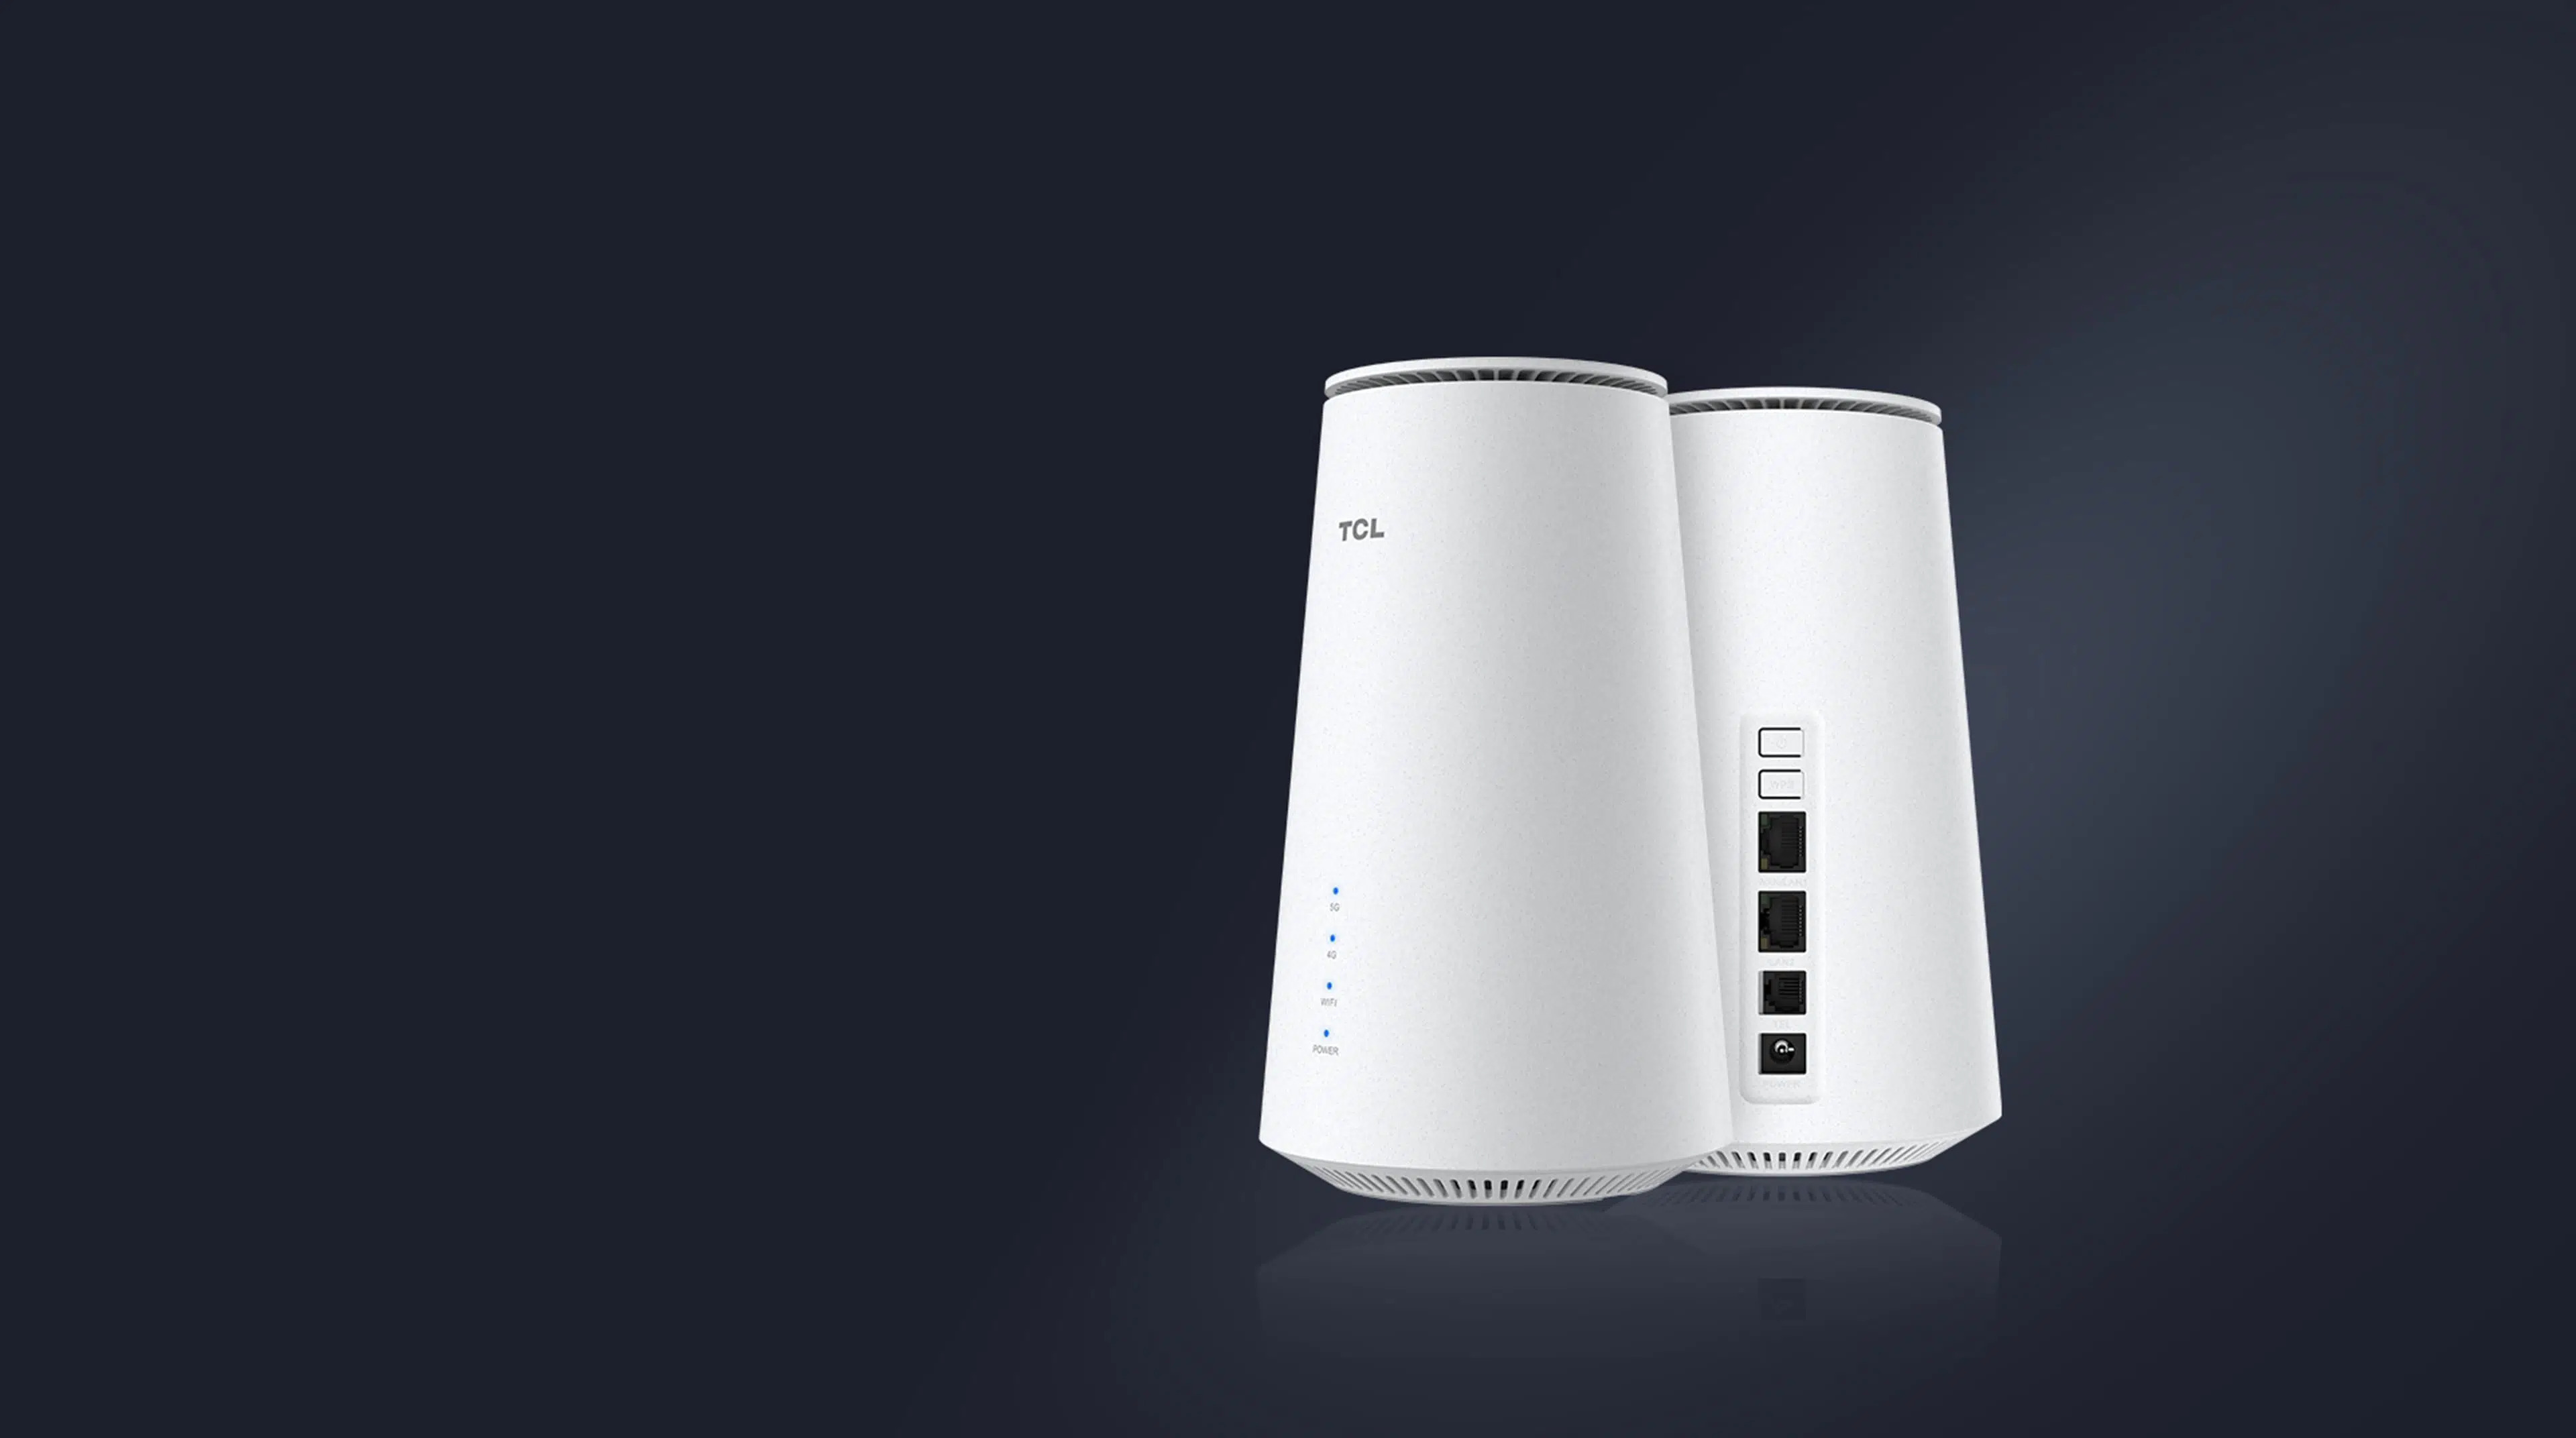 tcls-new-routers-give-you-5g-speeds-at-home-and-on-the-go